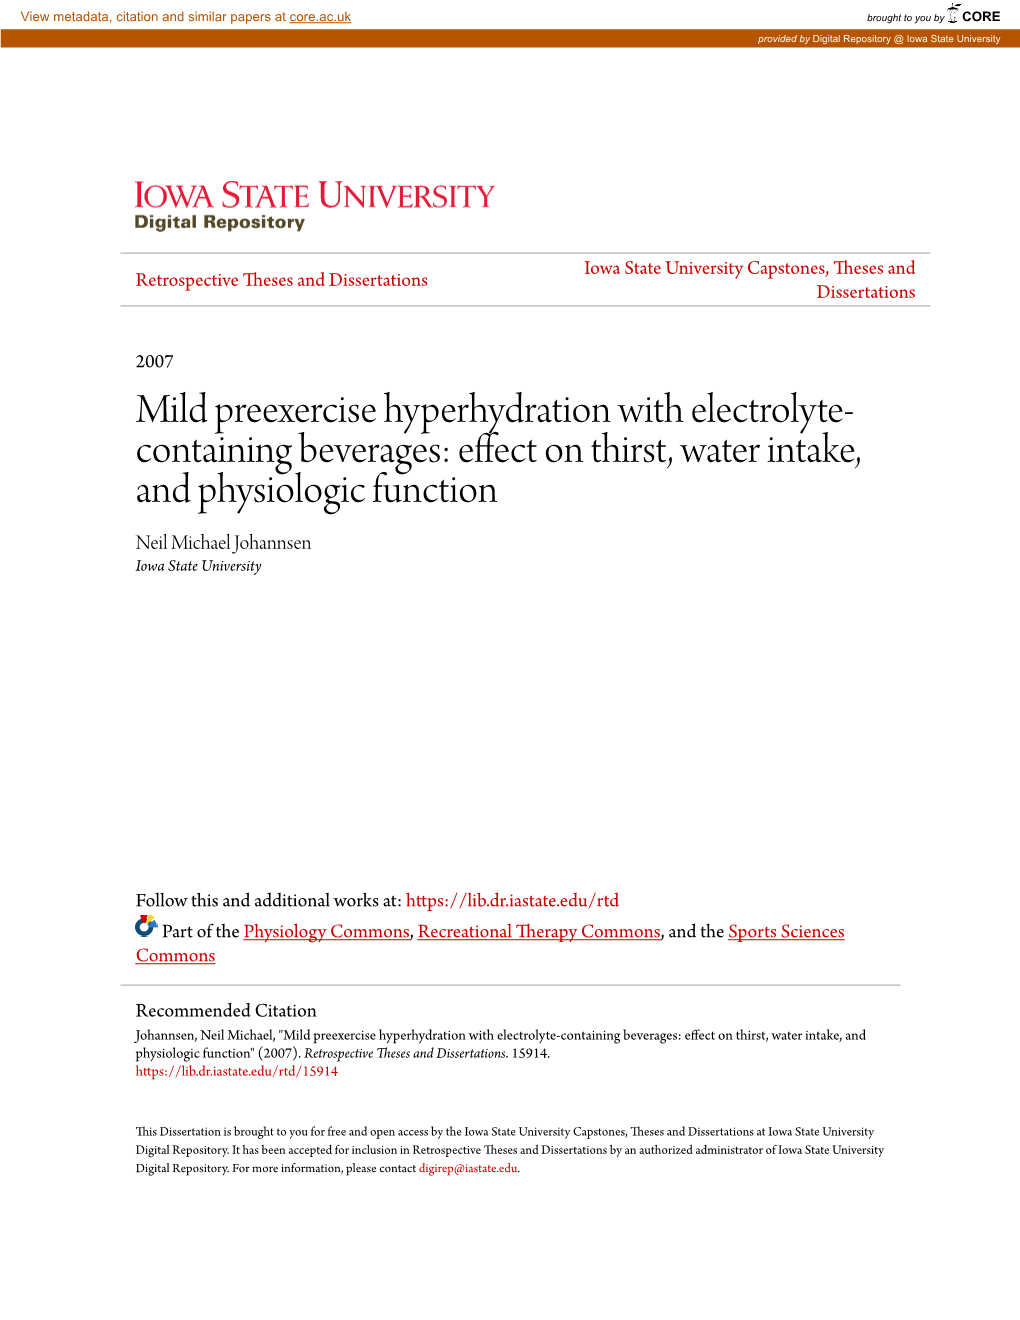 Mild Preexercise Hyperhydration with Electrolyte-Containing Beverages: Effect on Thirst, Water Intake, and Physiologic Function" (2007)